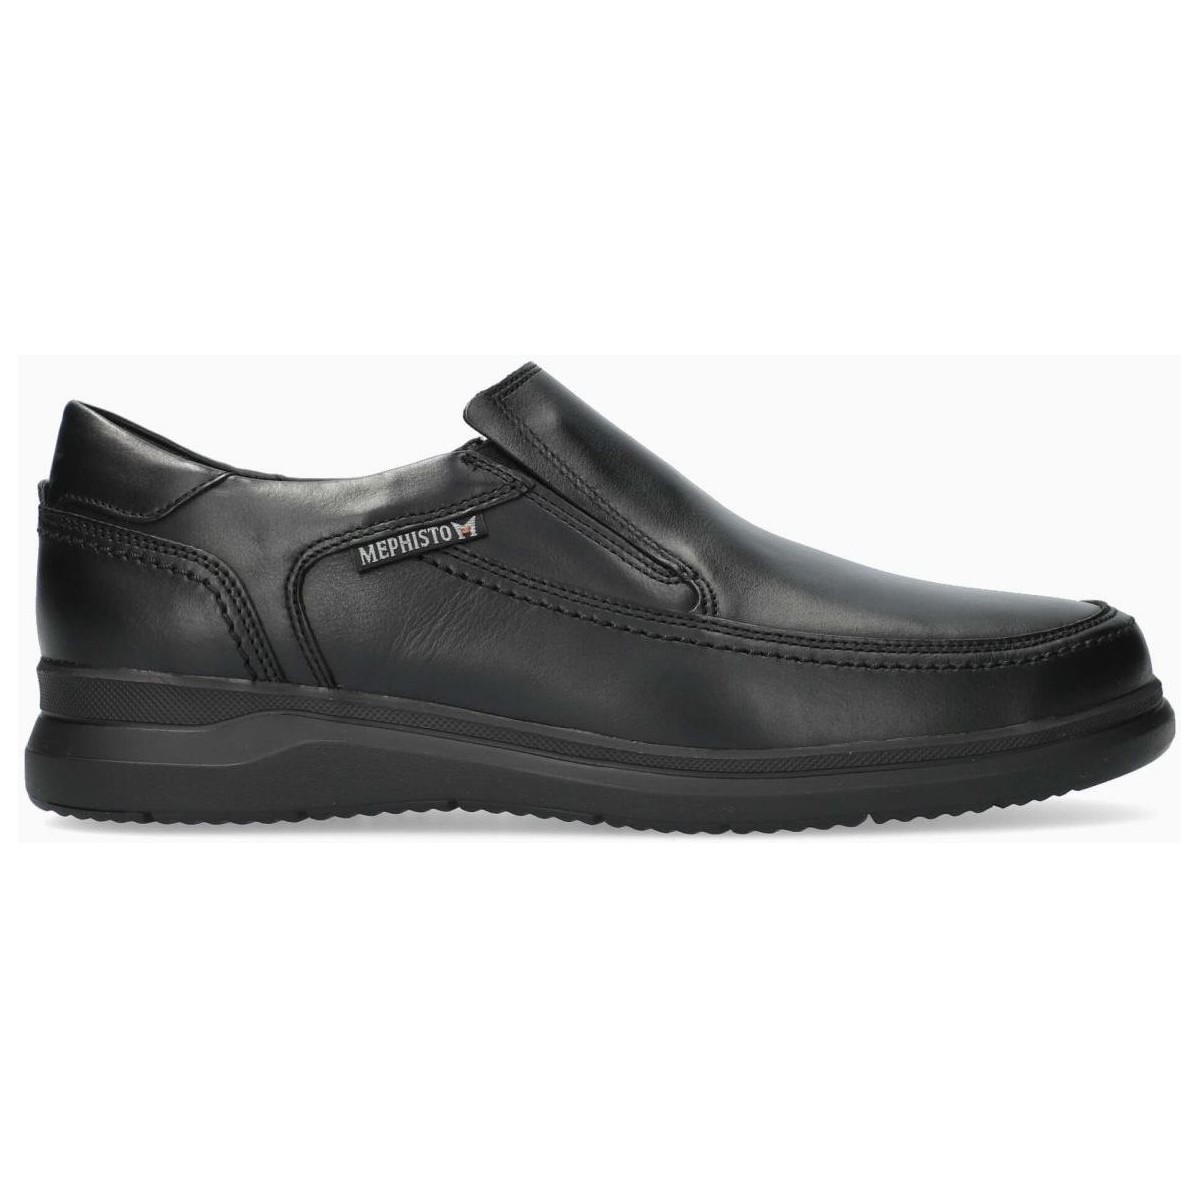 Chaussures Homme Derbies Mephisto Chaussures en  ANDY Noir